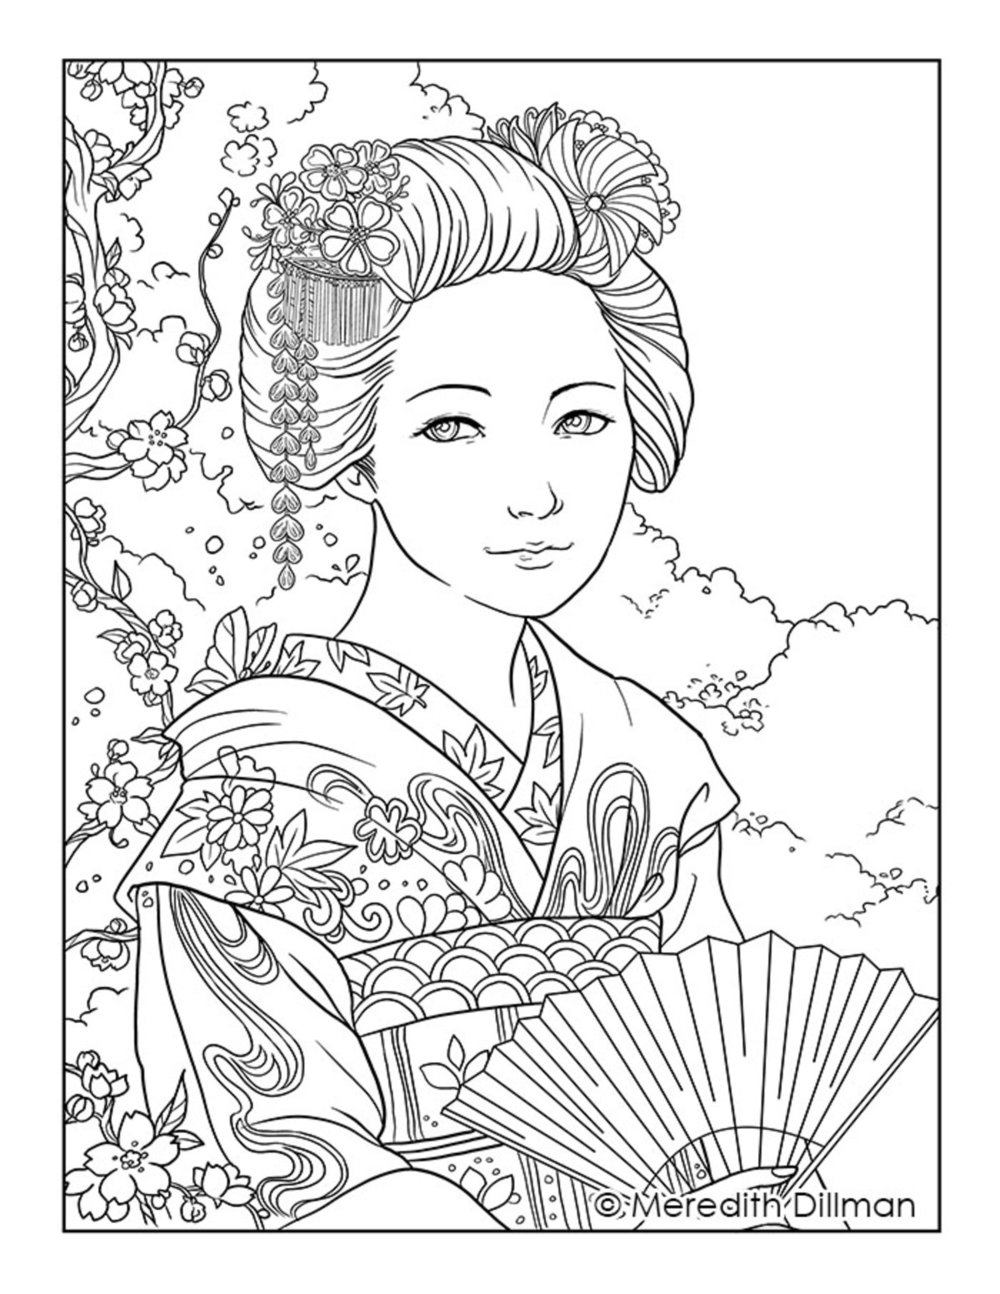 Coloring Pages — Tate Licensing